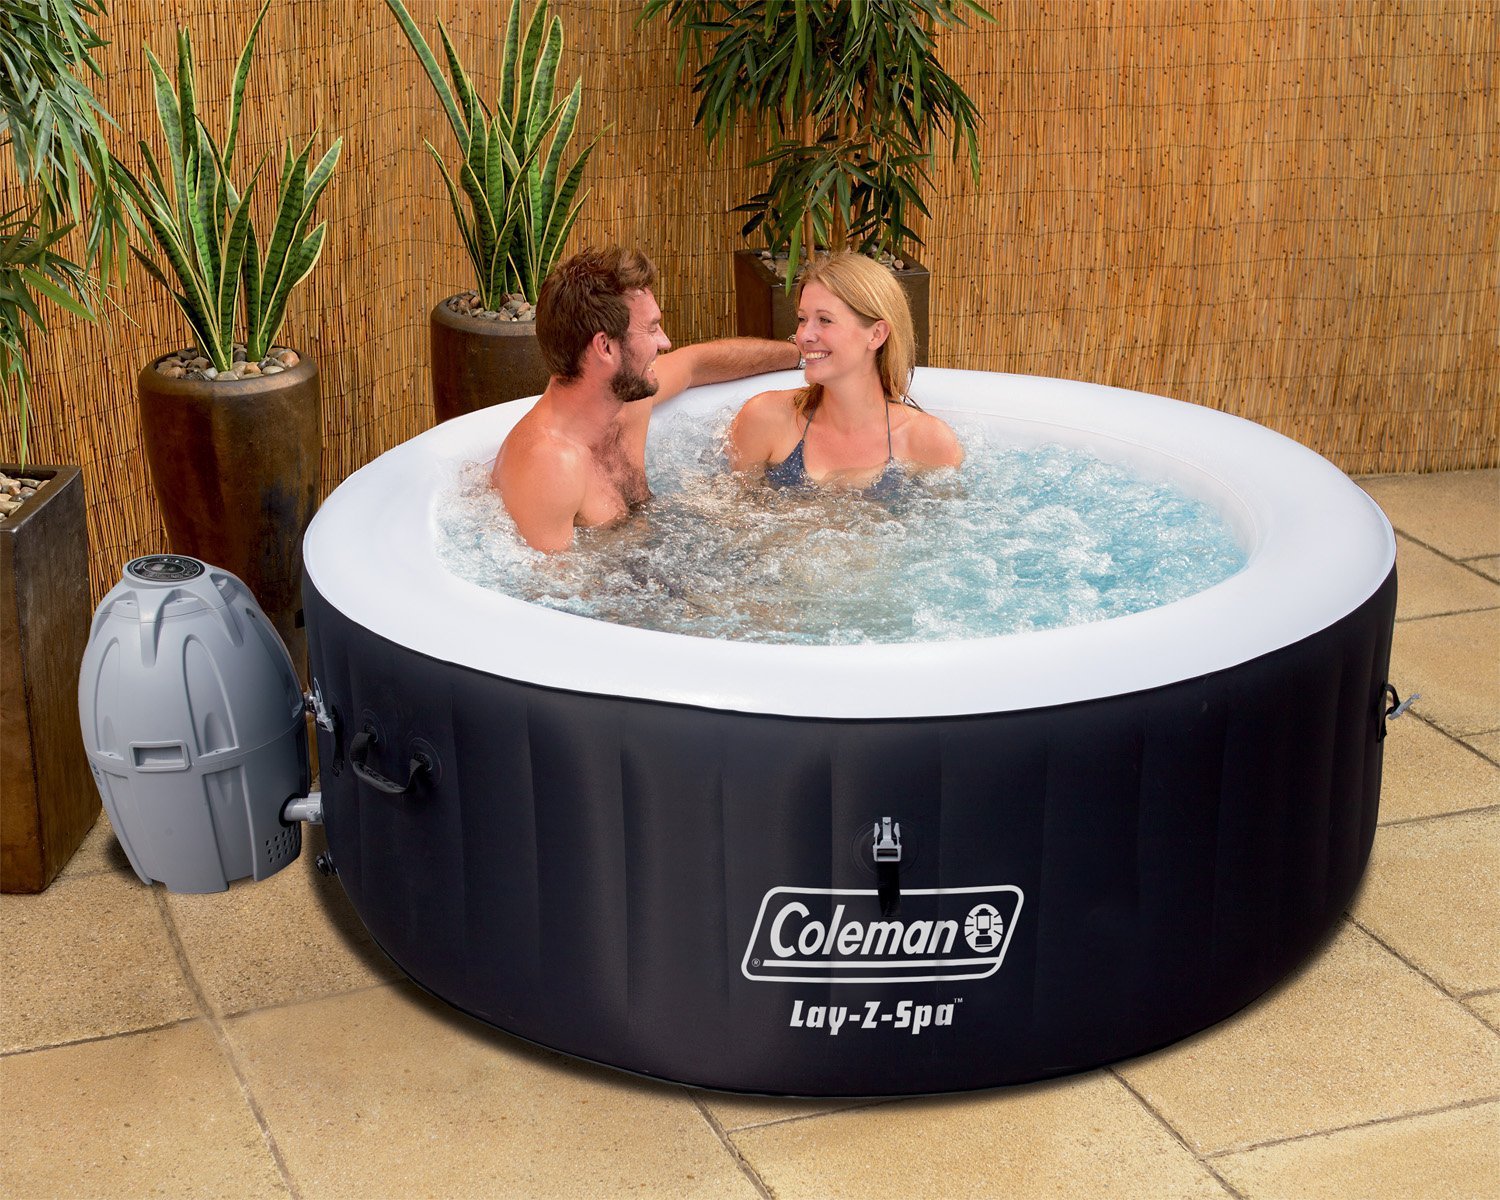 Coleman Saluspa 4 Person Portable Inflatable Outdoor Spa Hot Tub Hot Tub Digest